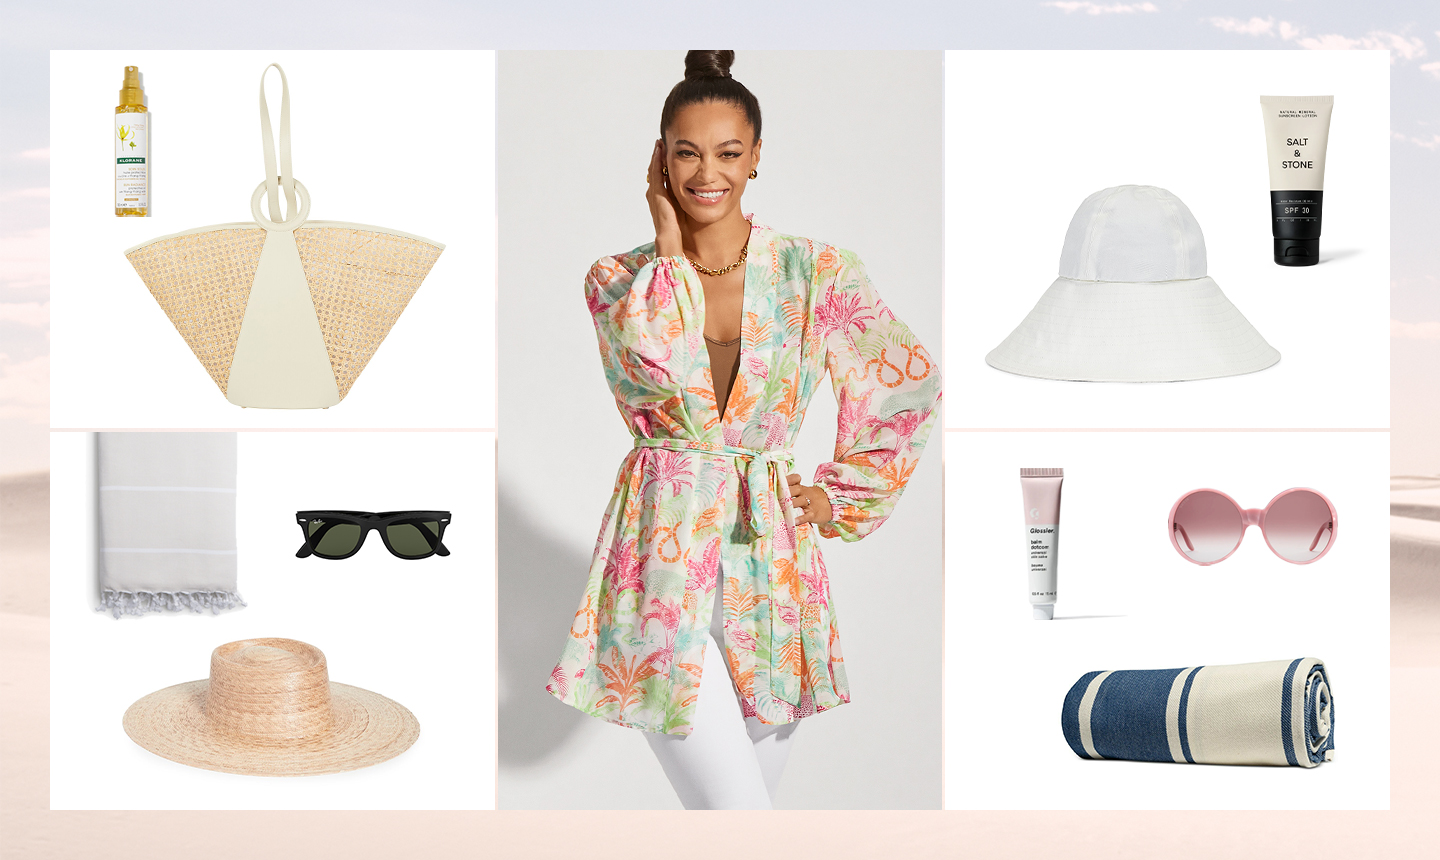 https://www.cabionline.com/wp-content/uploads/2022/06/cabi-Clothing-new-arrivals-beach-bag_featured.jpg